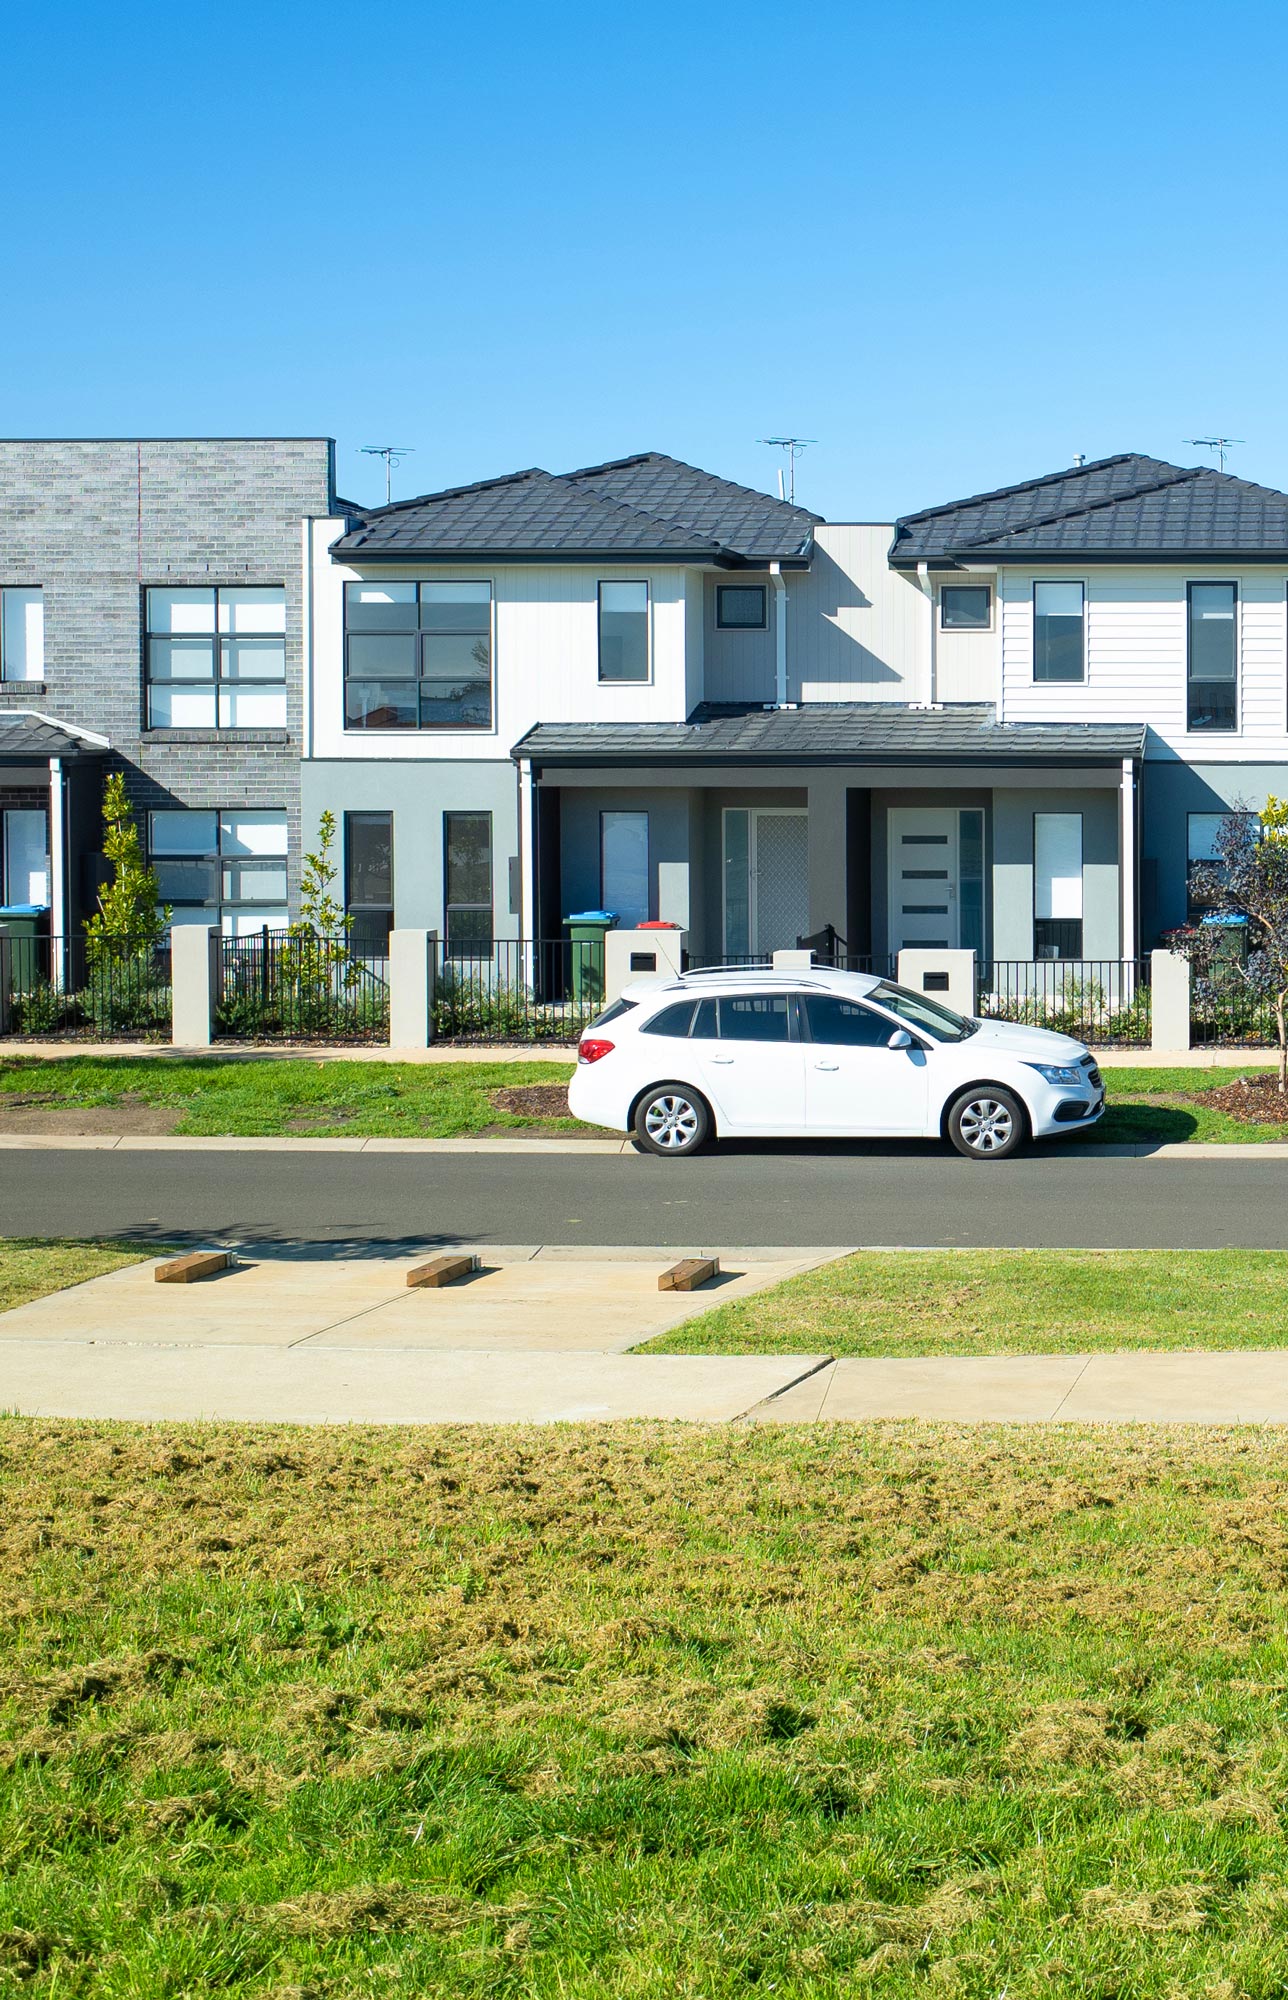 New $6.8 million affordable housing initiative helping low-income South Australians buy a home